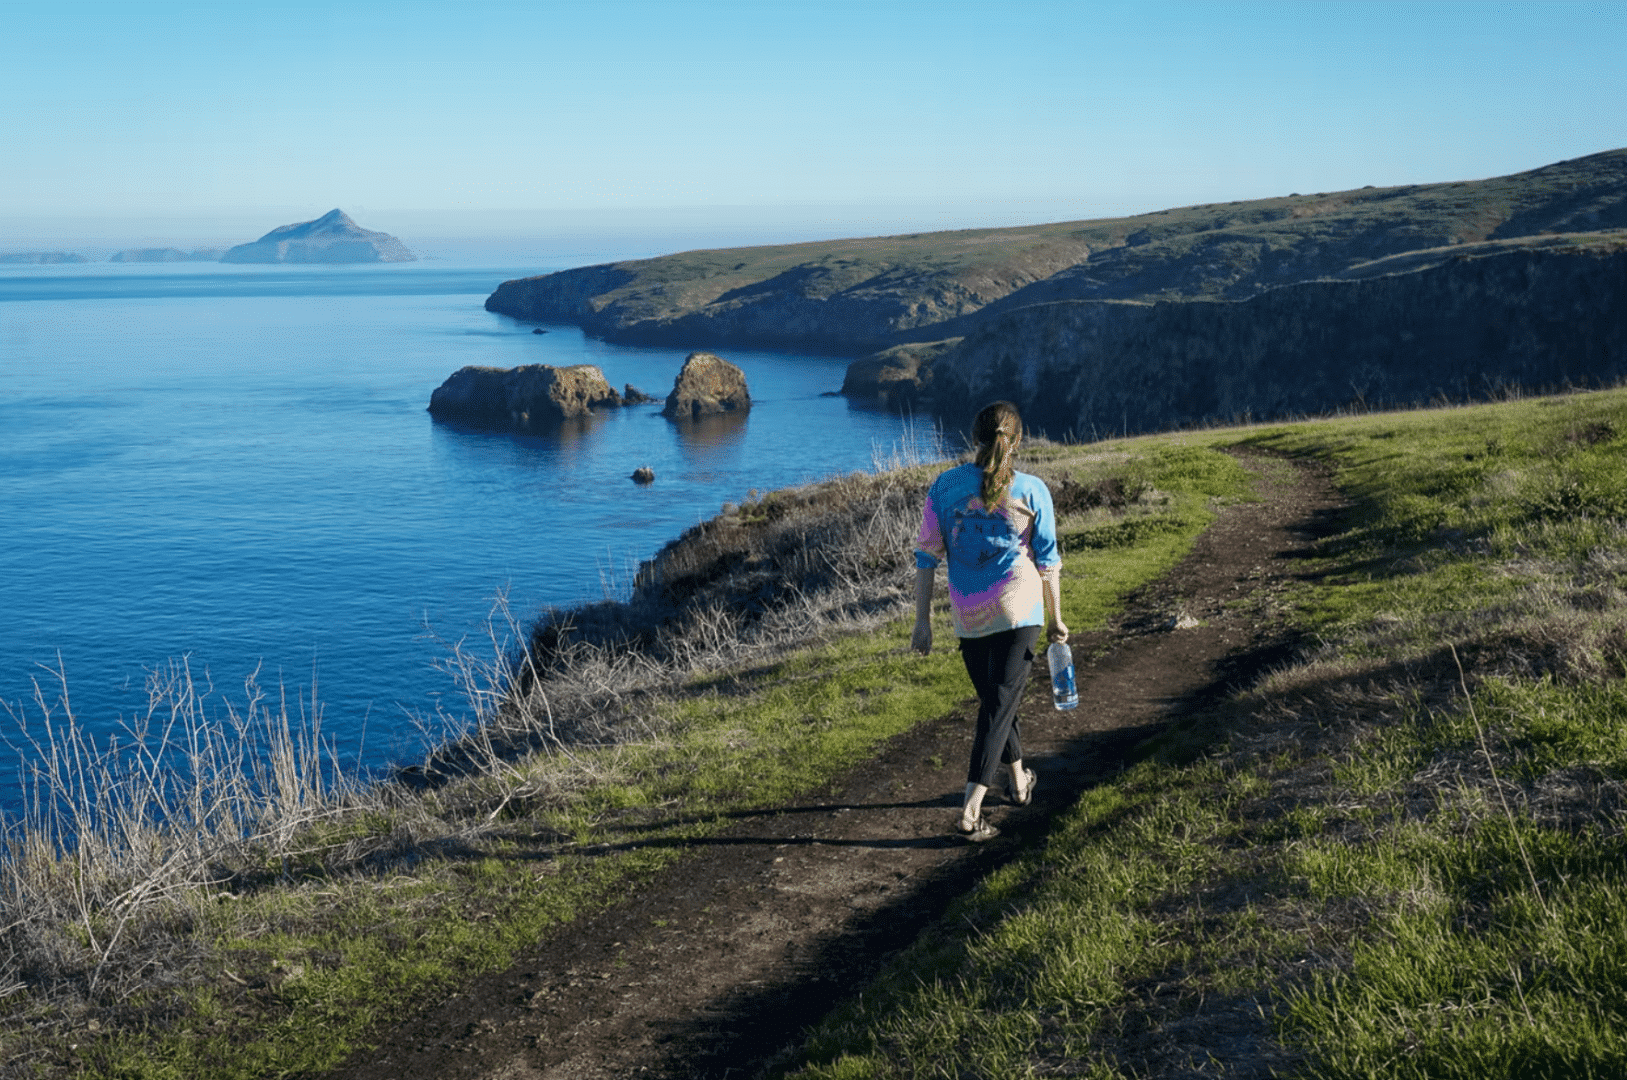 Weekend Sherpa visit to Channel Islands National Park